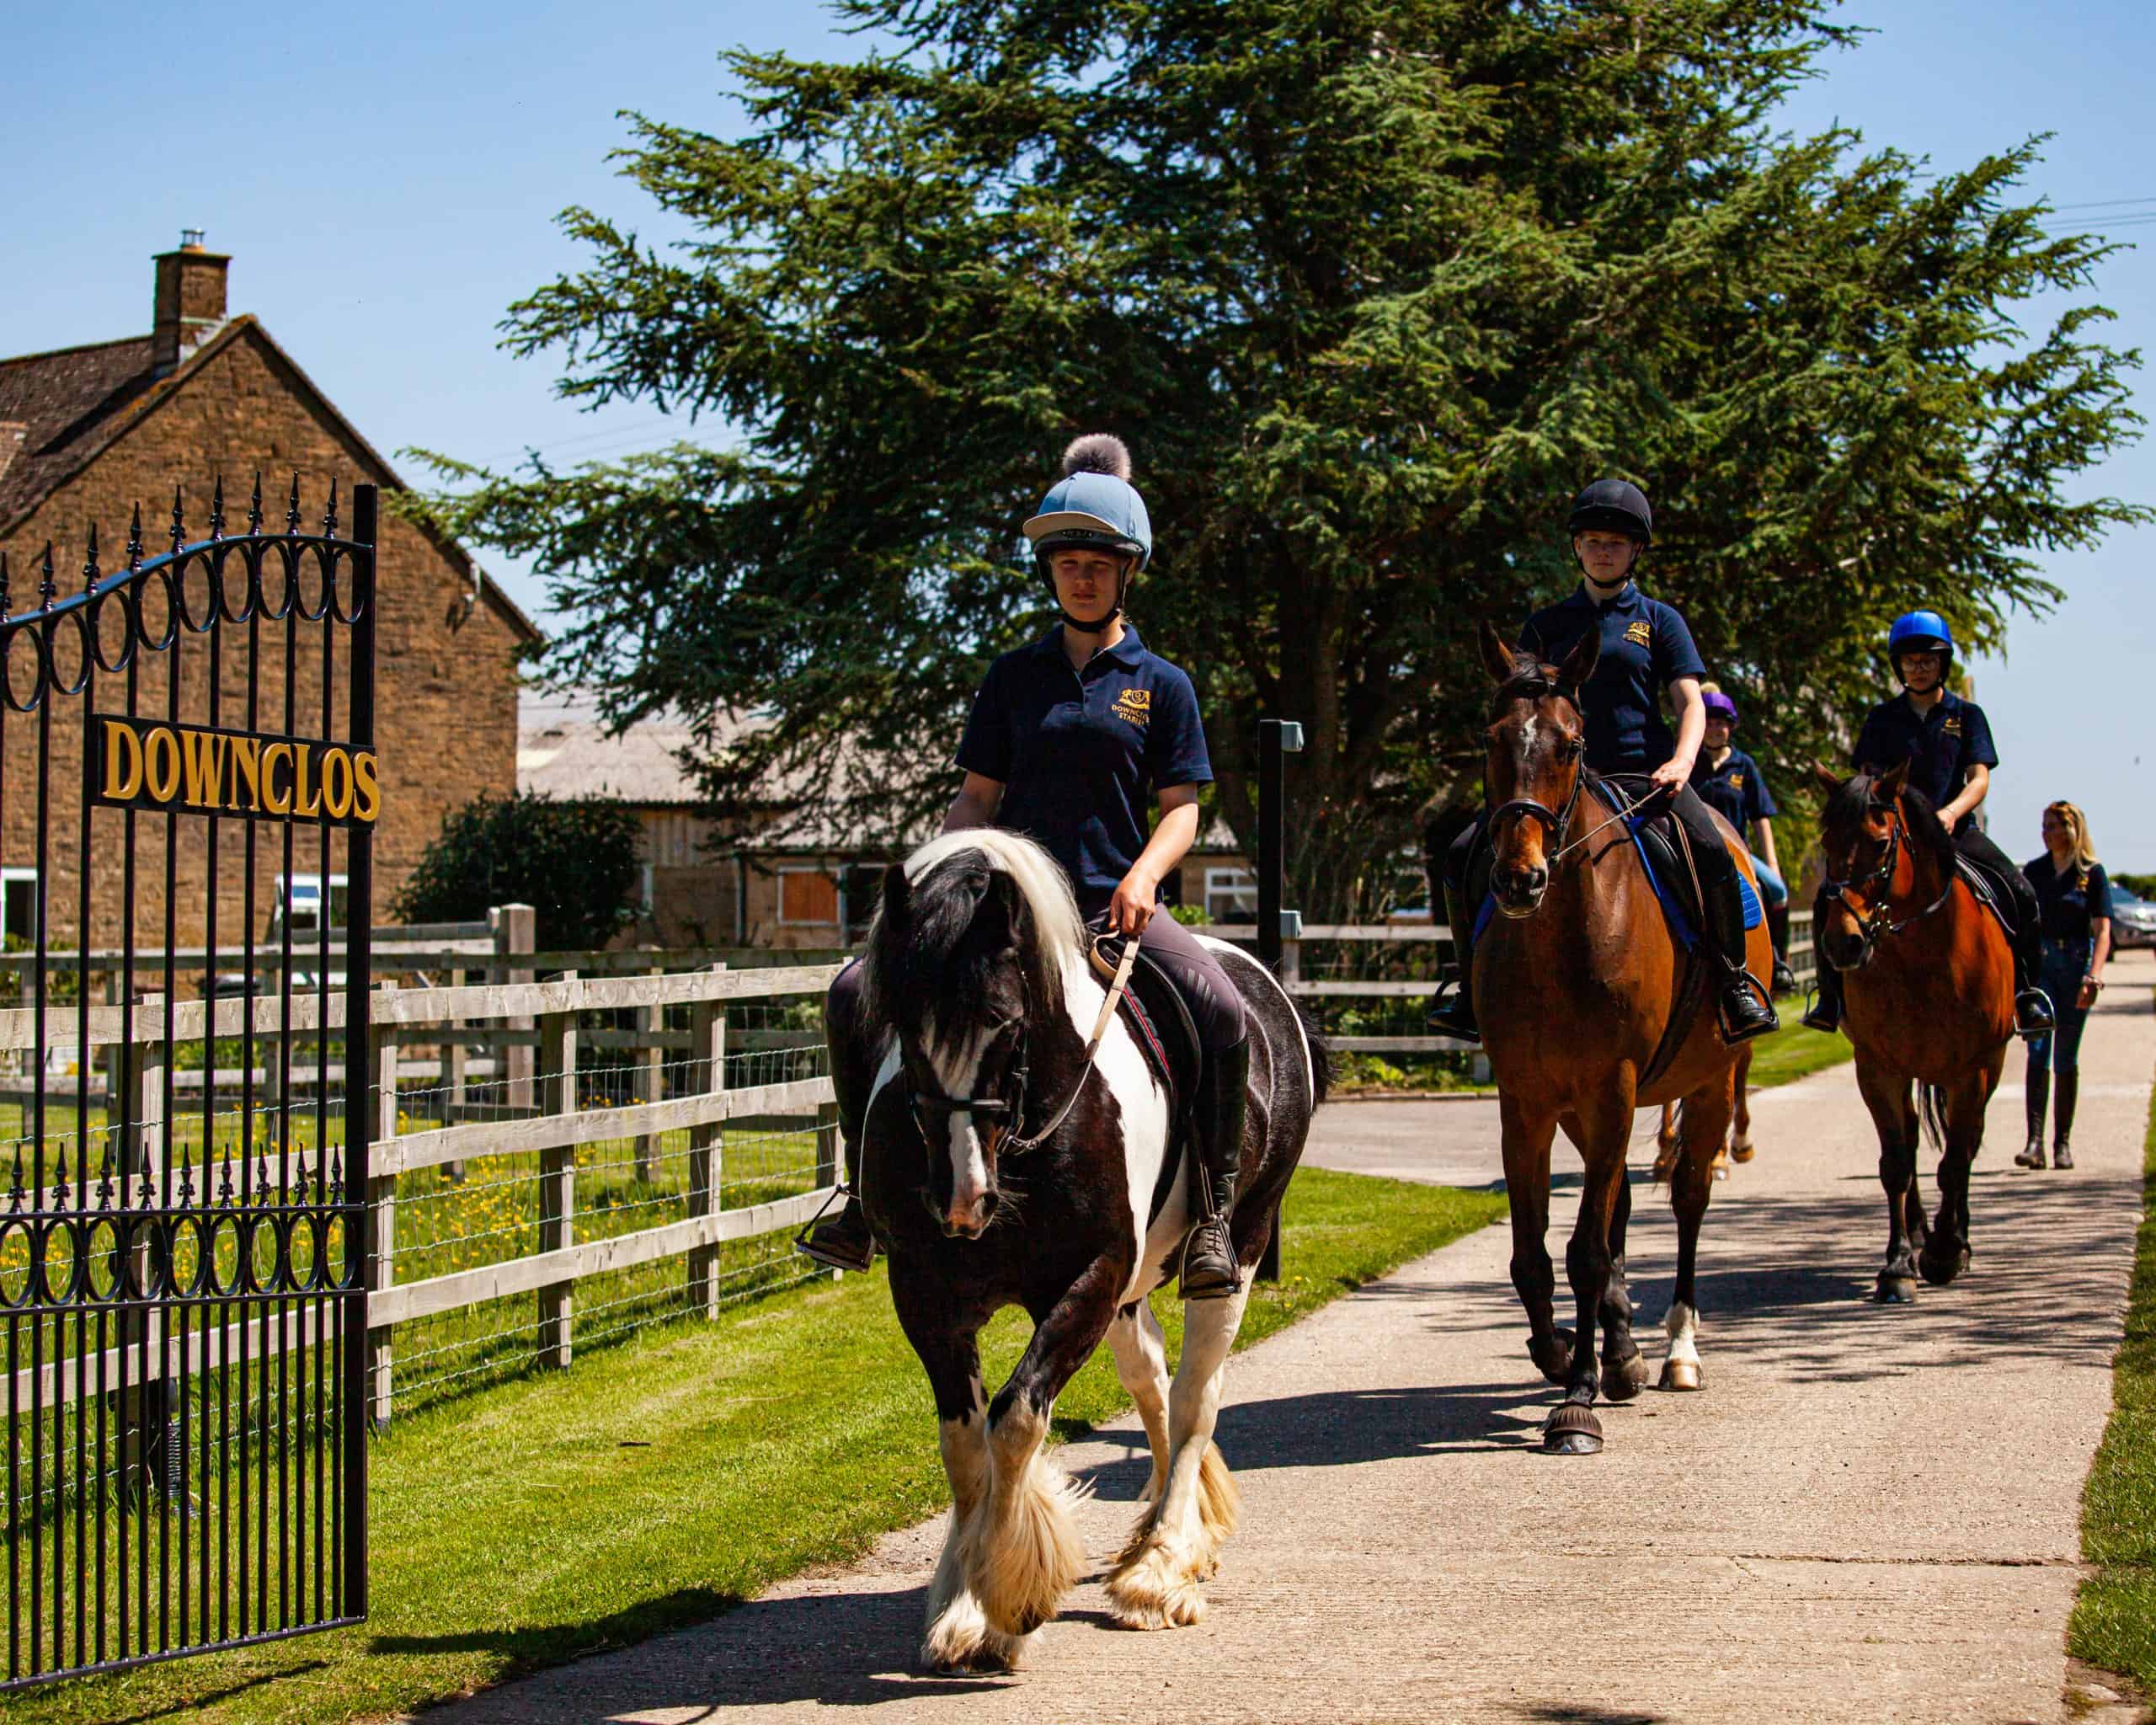 Horses hacking out of gate at Downclose Stables